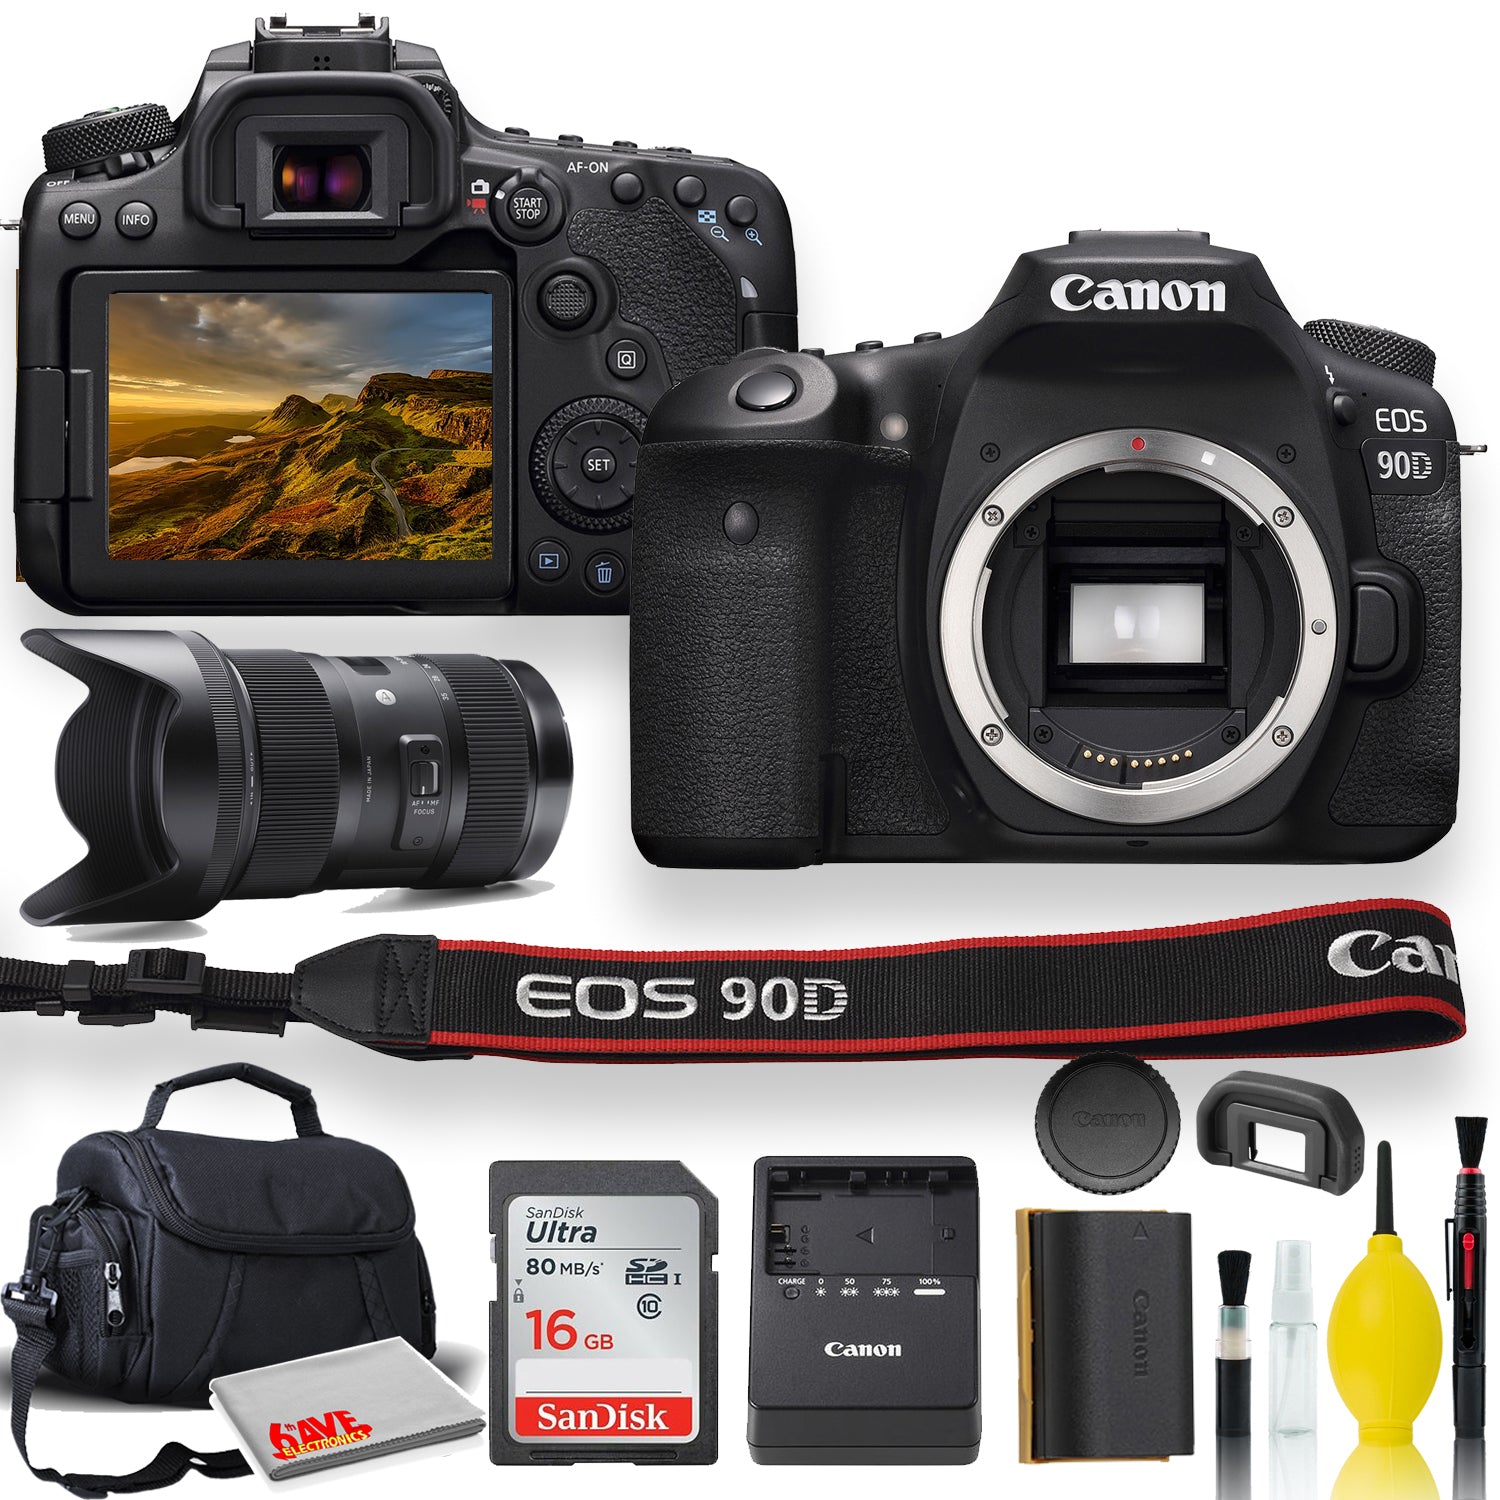 Canon EOS 90D DSLR Camera With Sigma 18-35mm Lens, Soft Padded Case, Memory Card, and More